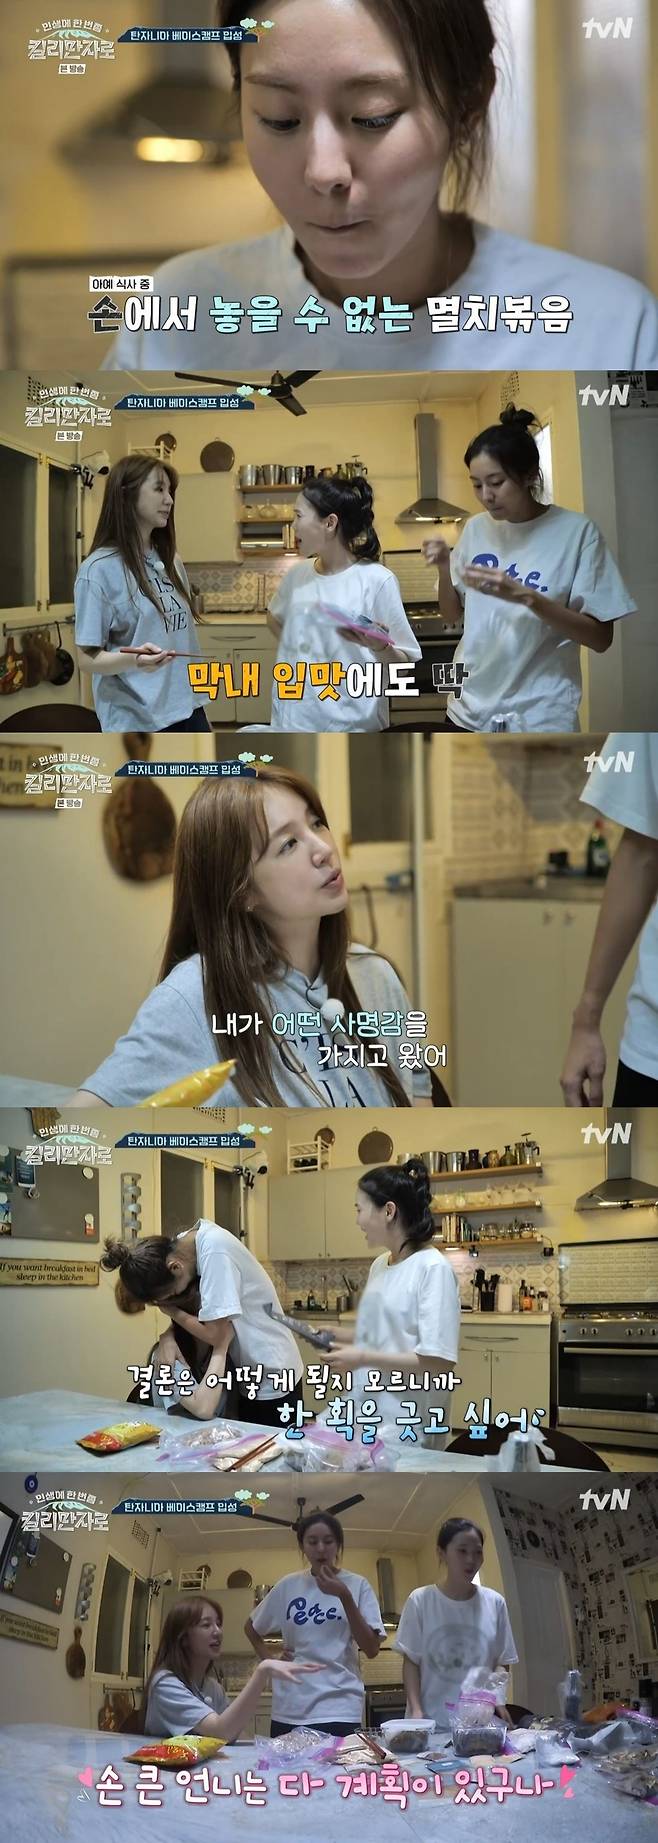 Kilimanjaro Yoon Eun-hye talked about the mission of the members meals.Yoon Eun-hye, who entered the Tanzanian base camp, was portrayed in Kilimanjaro! (Kilimanjaro) once in his life on TVN broadcast on November 5th.Yoon Eun-hye took out various food ingredients and side dishes from the hostel. Uee, who tasted his side dish, admired his mouth enough to take out everything you have to taste.Uee then summoned Choi Hyo-jung while eating Yoon Eun-hyes stir-fried anchovies. Choi Hyo-jung also frowned at Yoon Eun-hyes side dish and tasted delicious.Yoon Eun-hye said, I have a mission. I will order two meals from the mountain. I will put all the healthy ones. I do not know what the result will be. I want to make a stroke.Ive done this in Kilimanjaro.Uee and Choi Hyo-jung each added a warmth to Yoon Eun-hyes burden and laughter.On the other hand, Kilimanjaro! Is a program that depicts the romance of young stars who are sincere in the mountains.